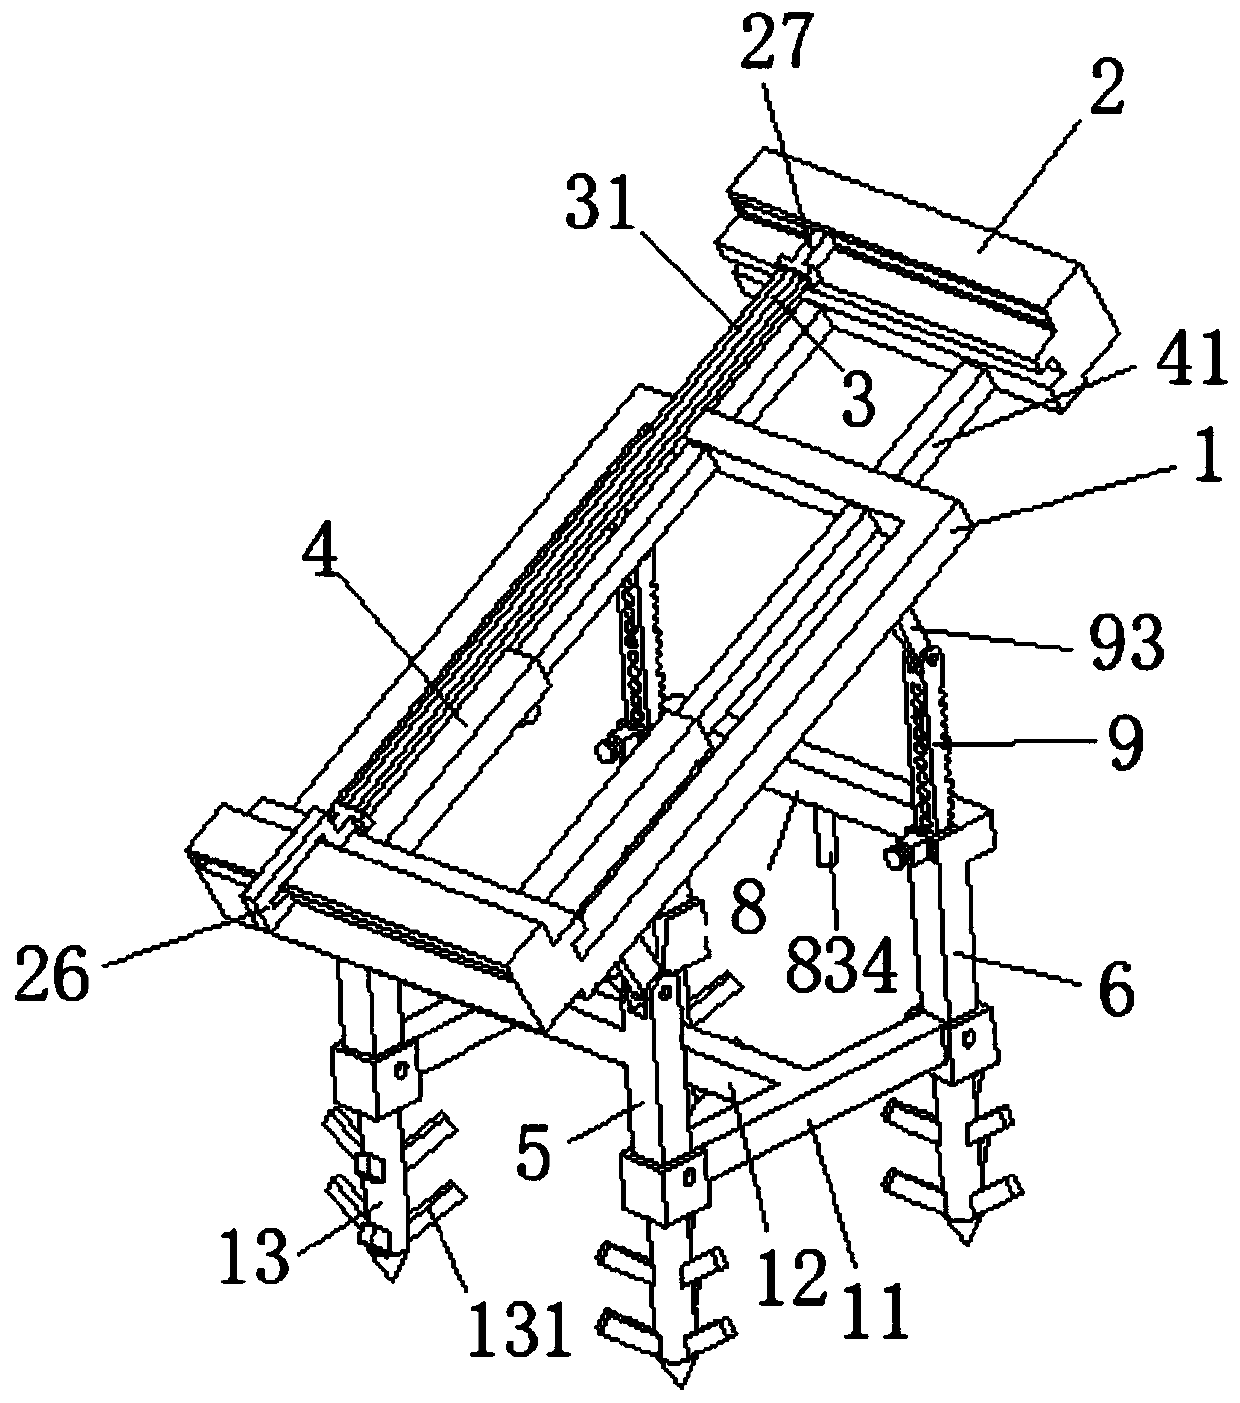 Mounting Brackets for Solar Photovoltaic Cell Modules